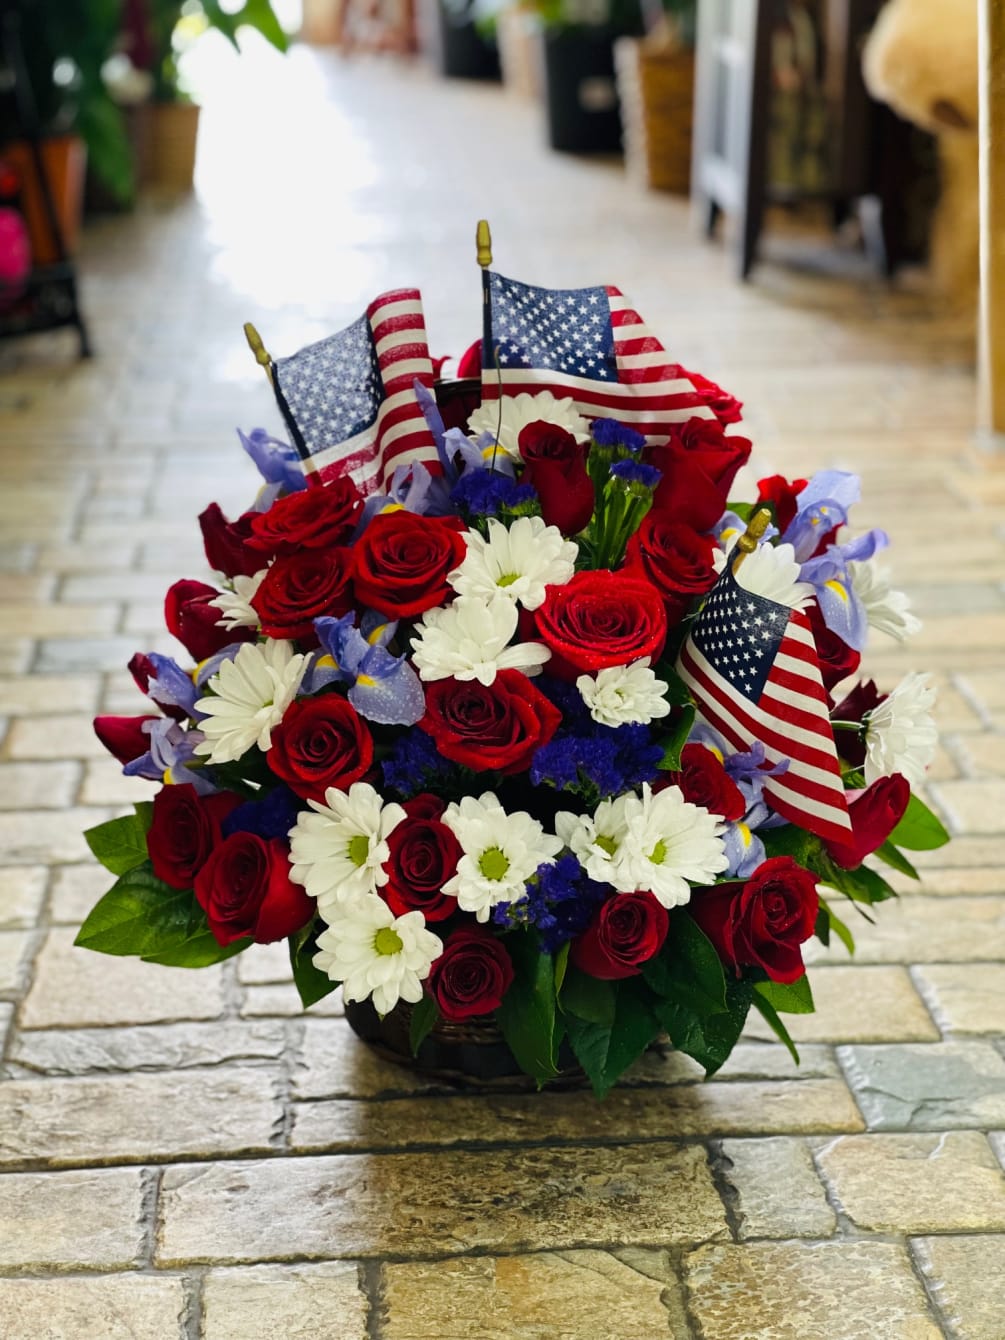 RED, WHITE, AND BLUE FLOWER ARRANGEMENT WITH ADDED AMERICAN FLAGS FOR OUR